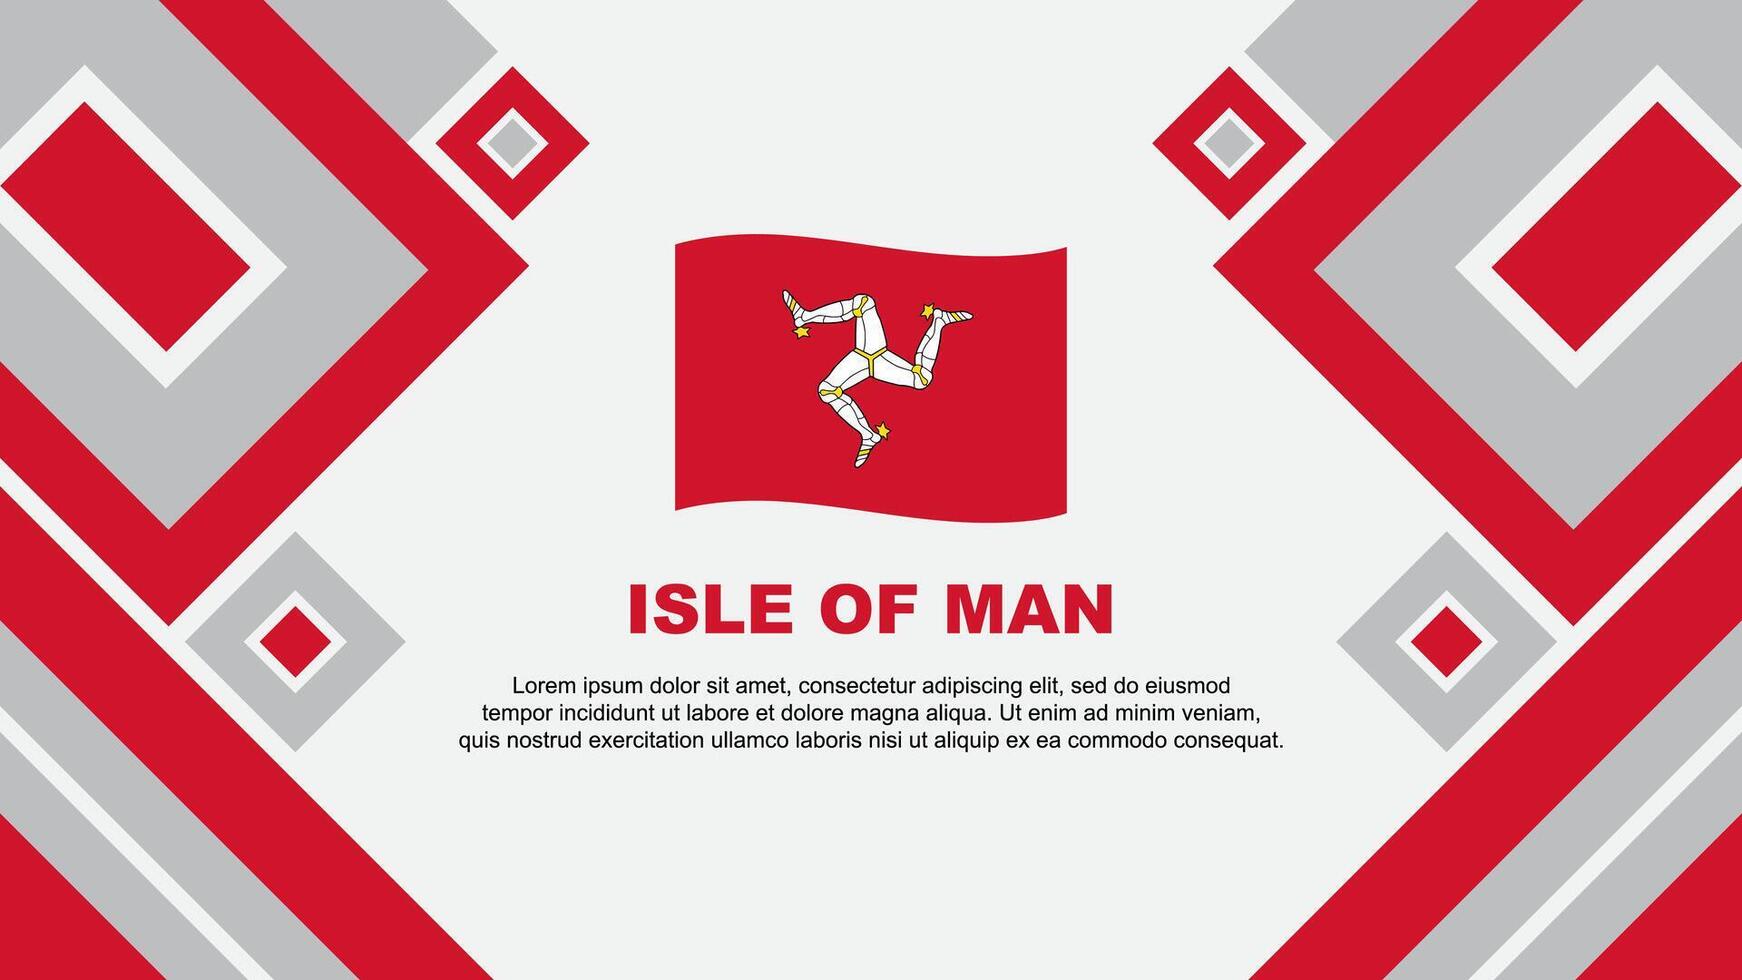 Isle Of Man Flag Abstract Background Design Template. Isle Of Man Independence Day Banner Wallpaper Vector Illustration. Isle Of Man Cartoon